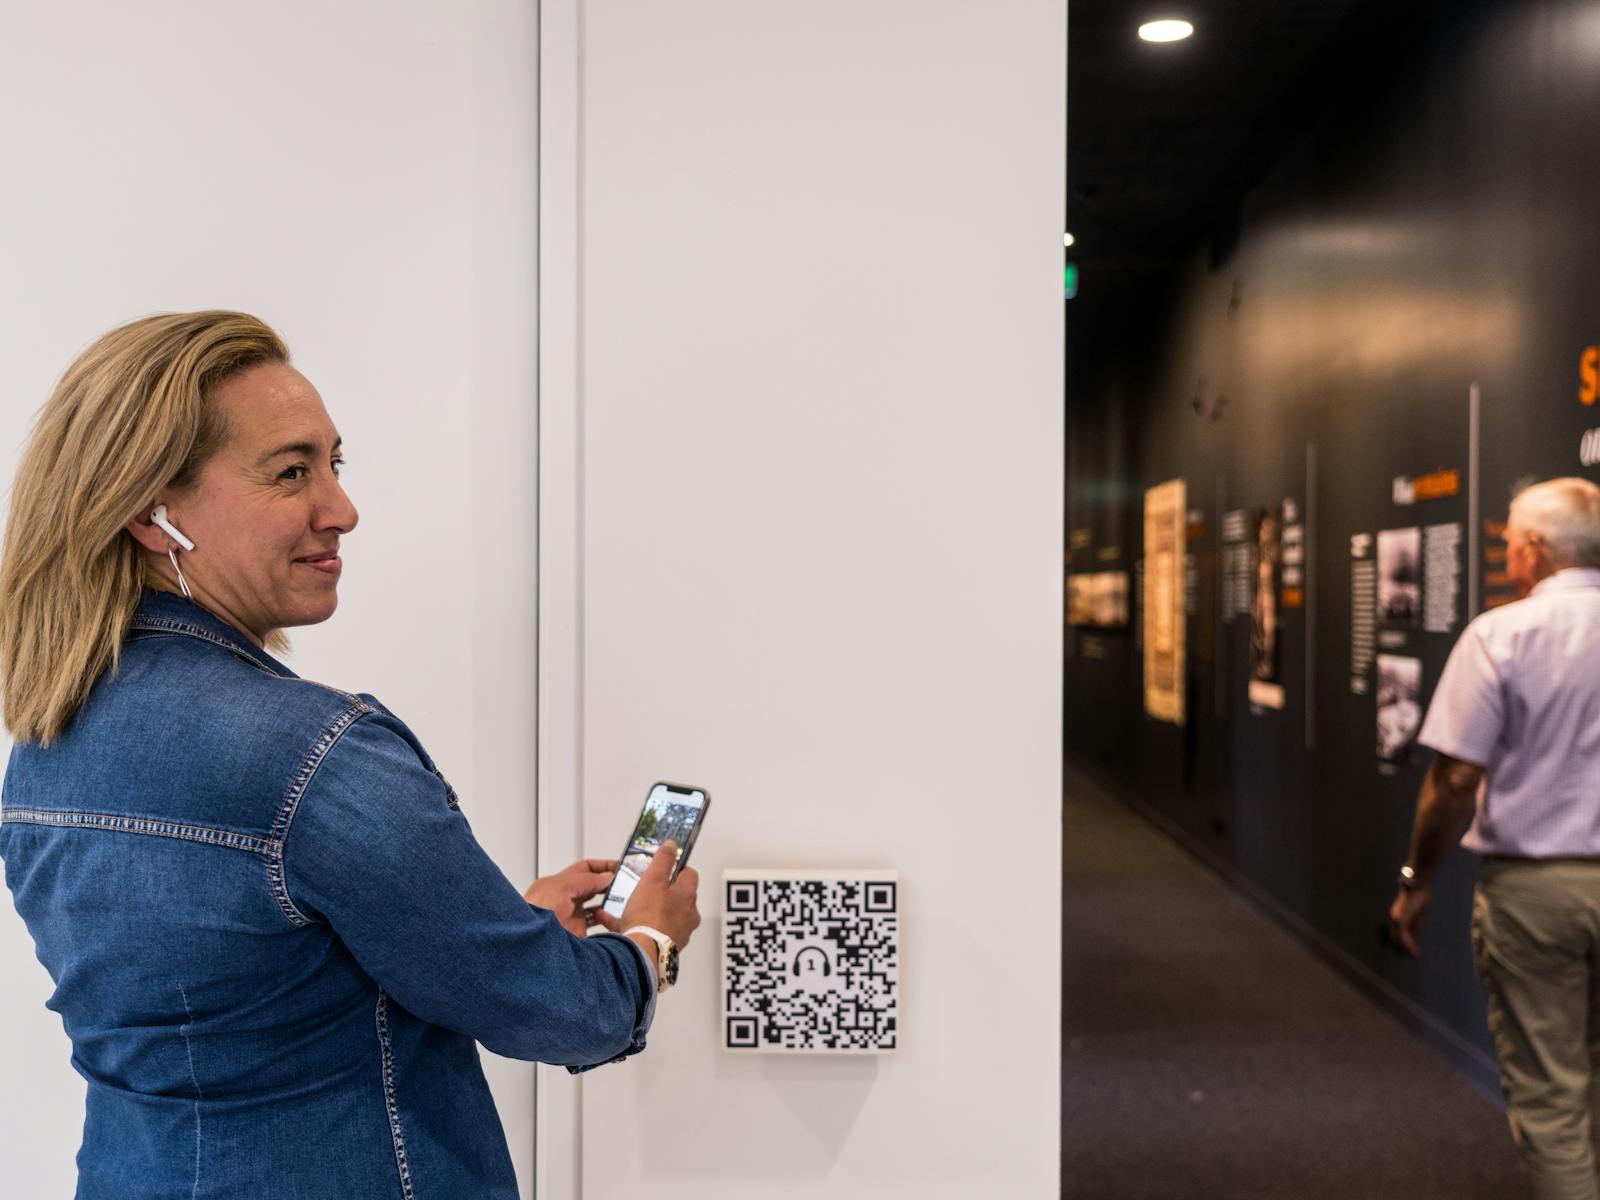 A lady wearing a headphone standing in front of the gallery scanning a QR code for Audio Tour